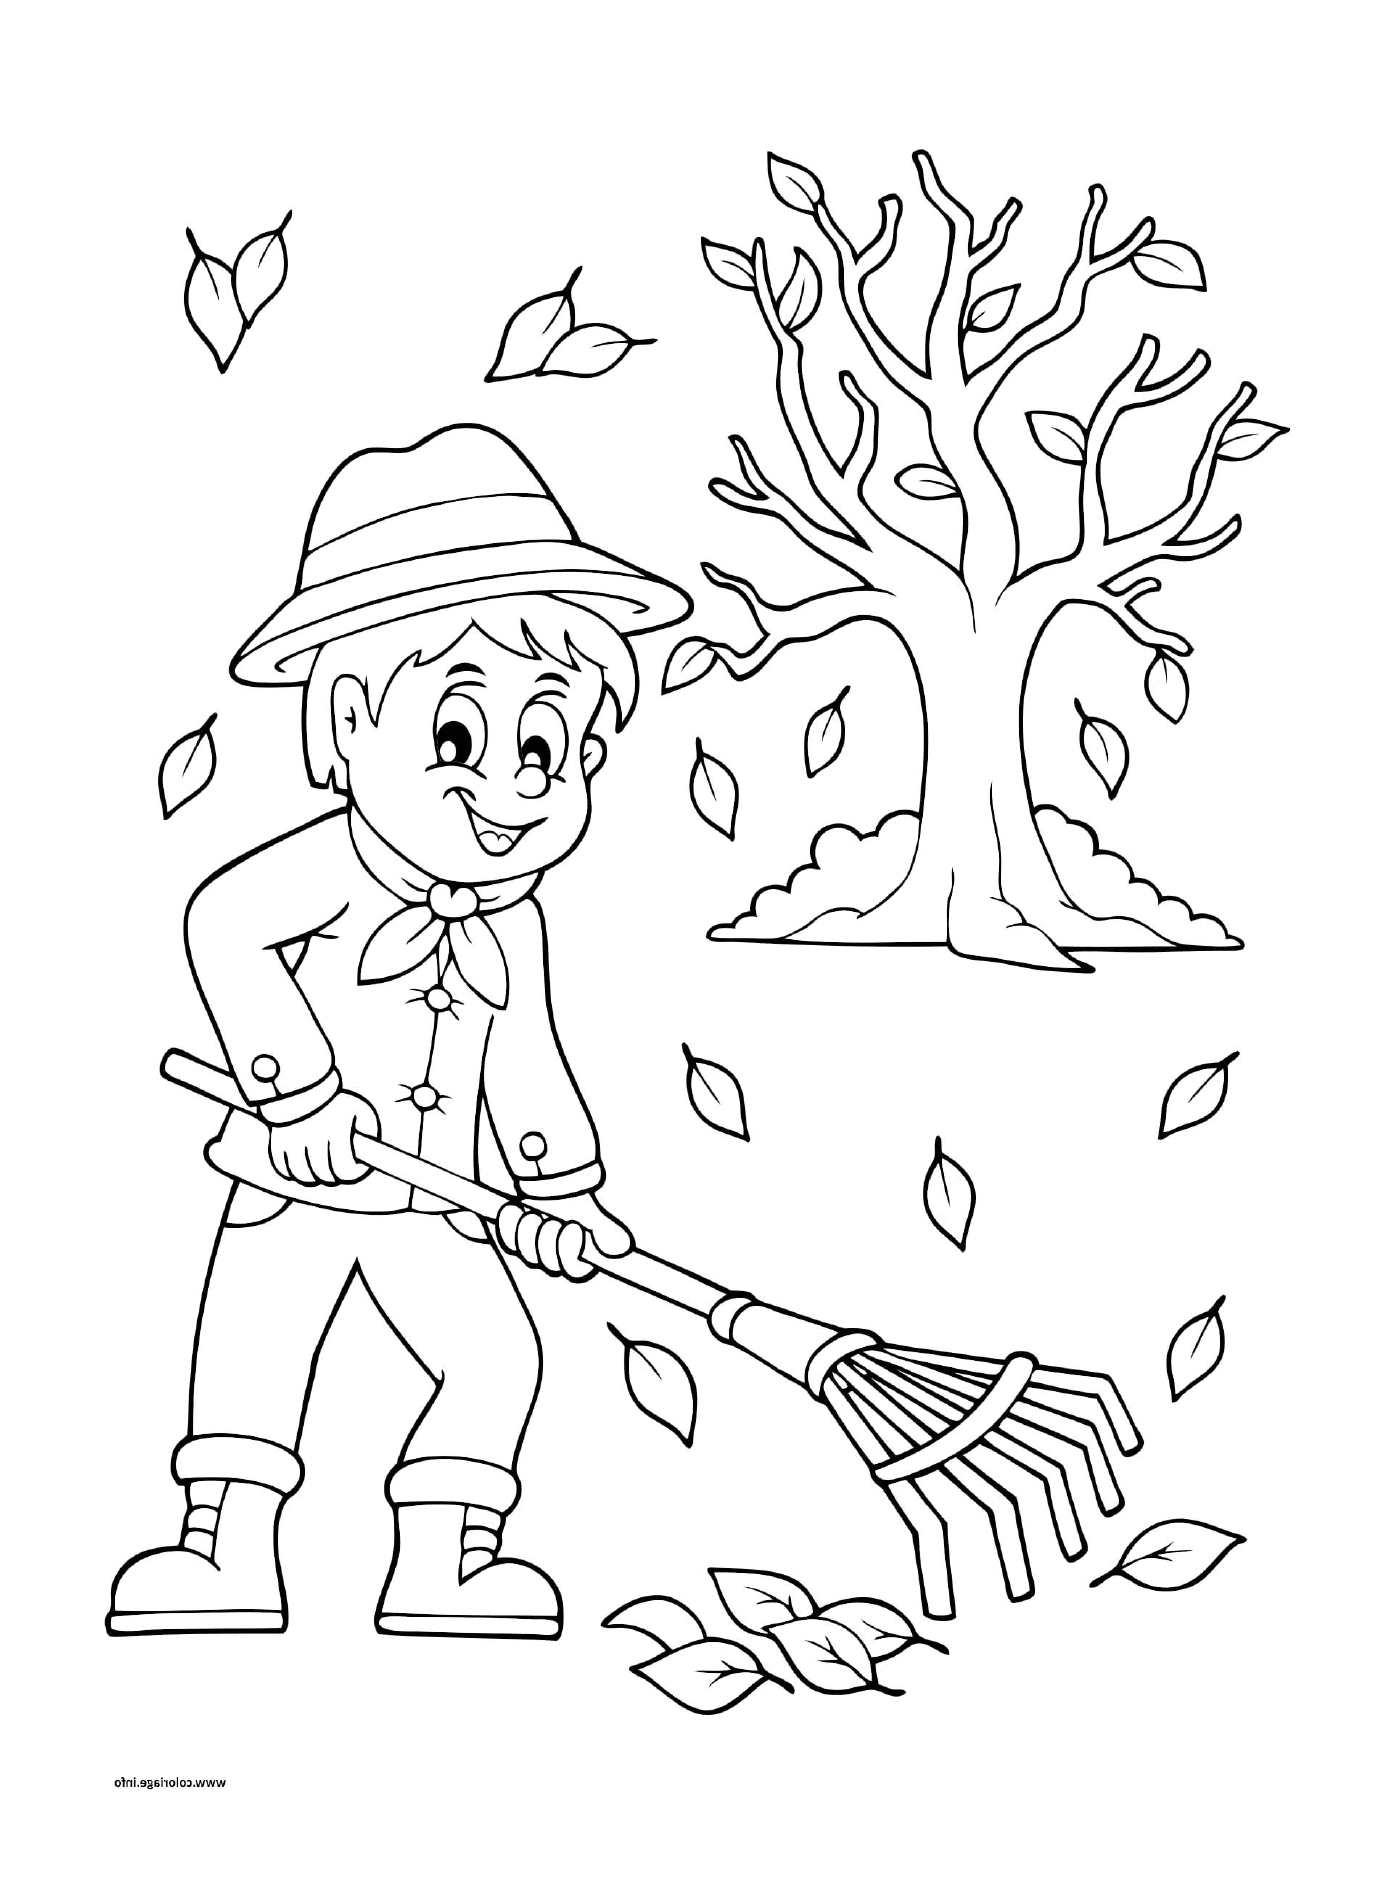  A boy ratting the leaves in the fall 